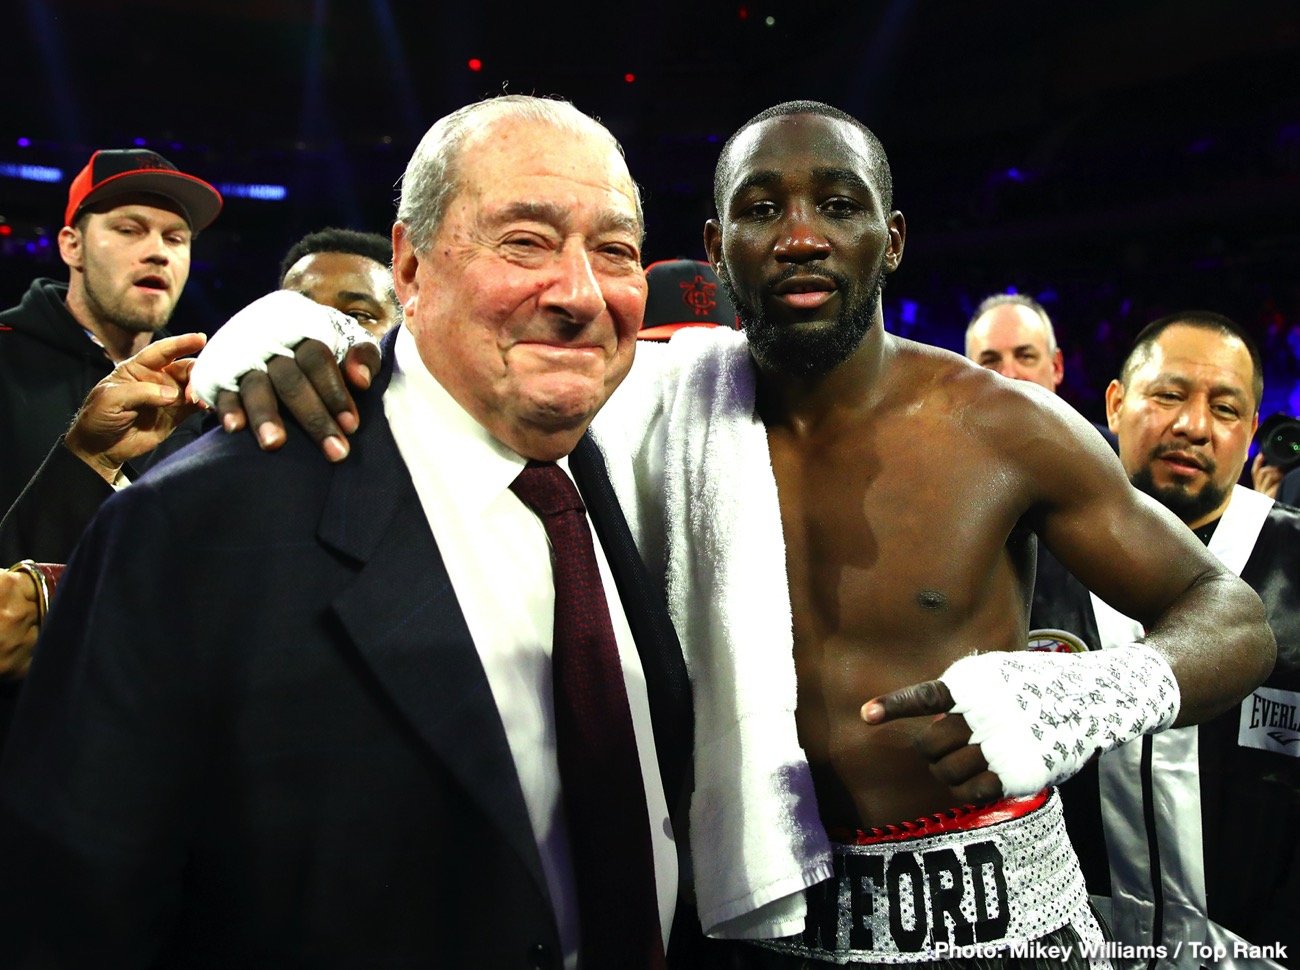 Image: Terence Crawford could face Kell Brook next